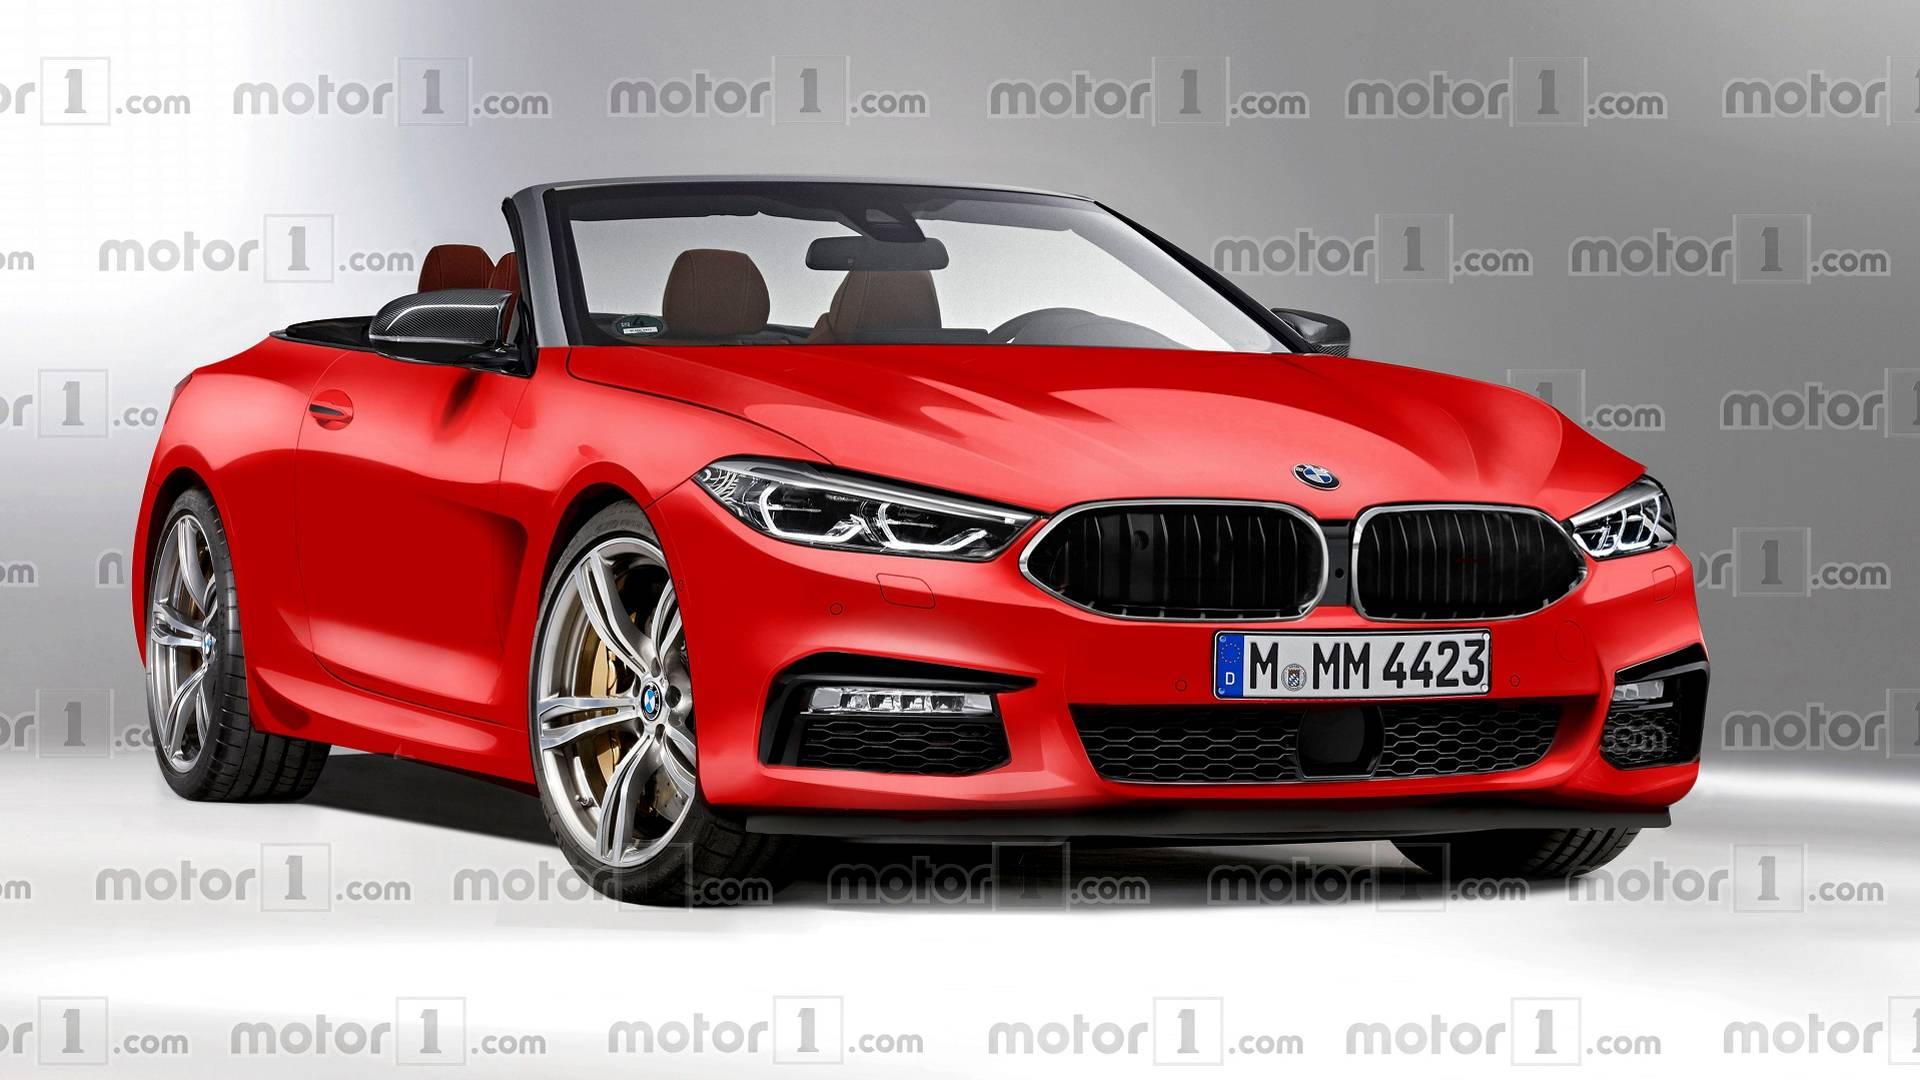 Rendering Reveals What A BMW Series Convertible Could Look Like